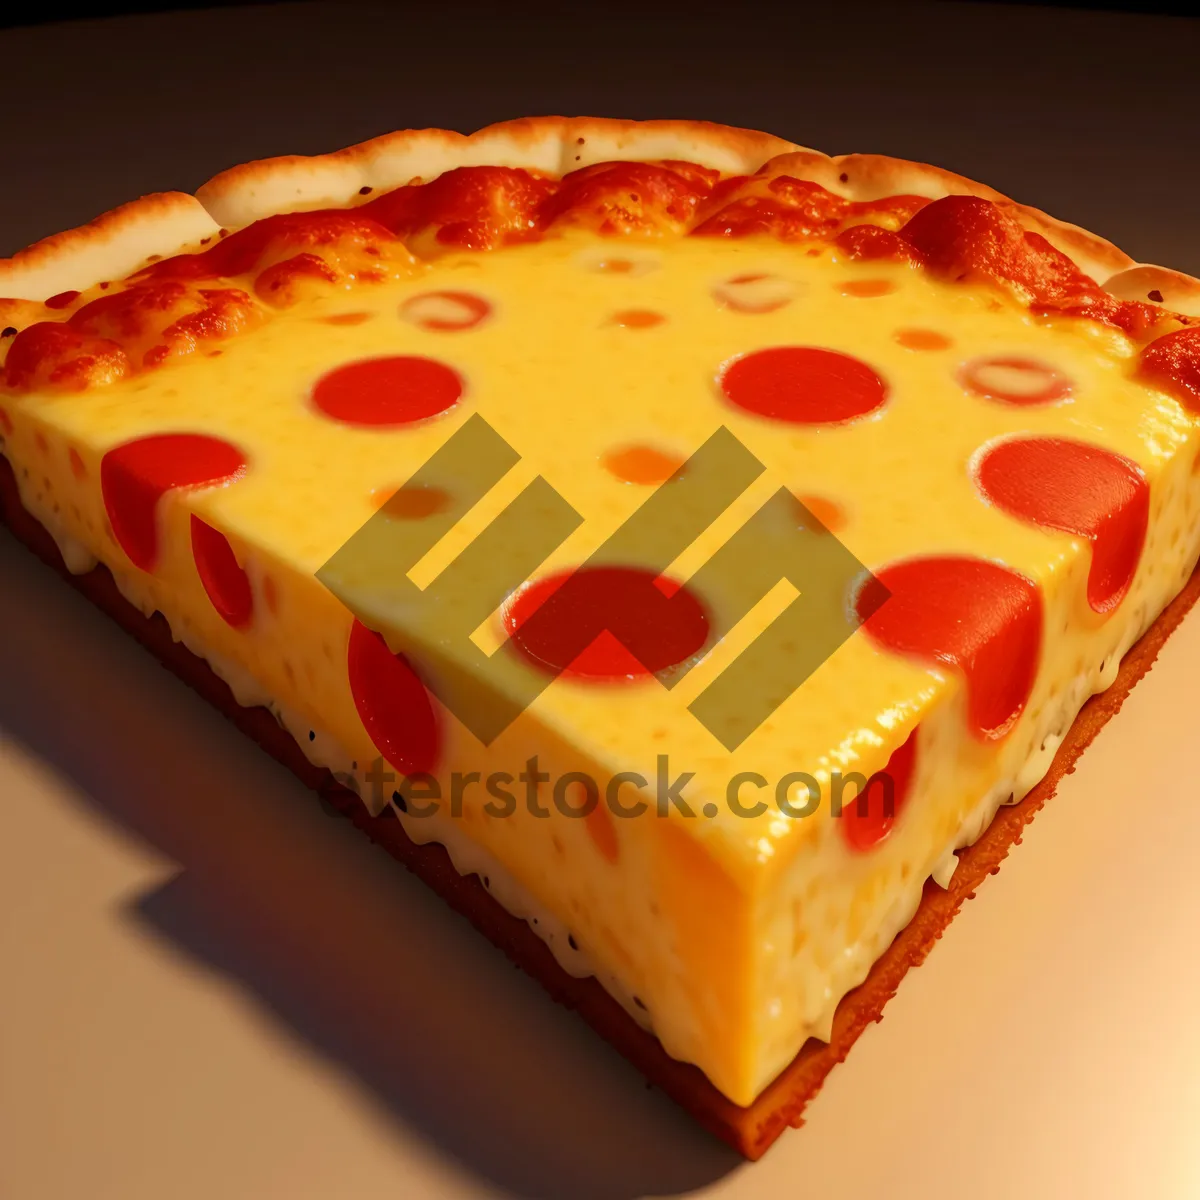 Picture of Gourmet Cheese Slice on Plate: Delicious Confectionery Snack